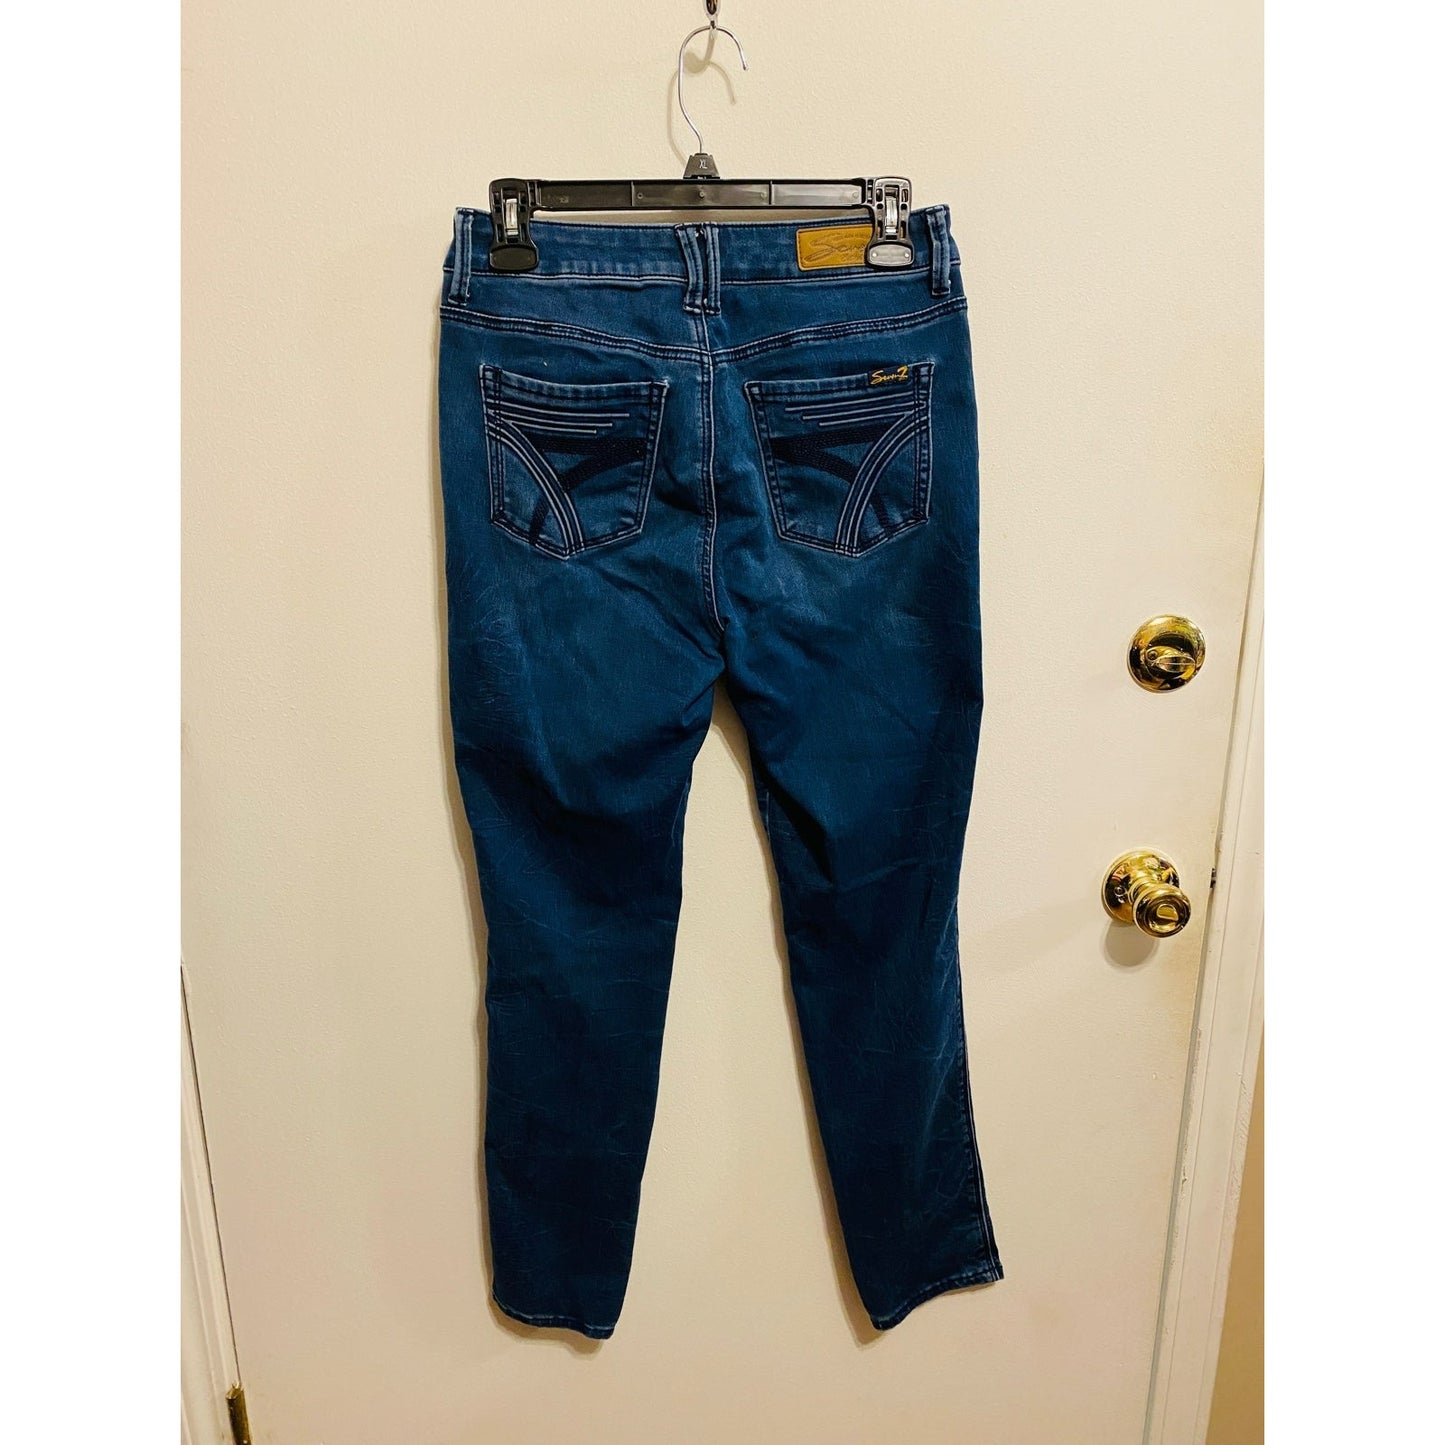 7 for all mankind high rise skinny jeans size 4